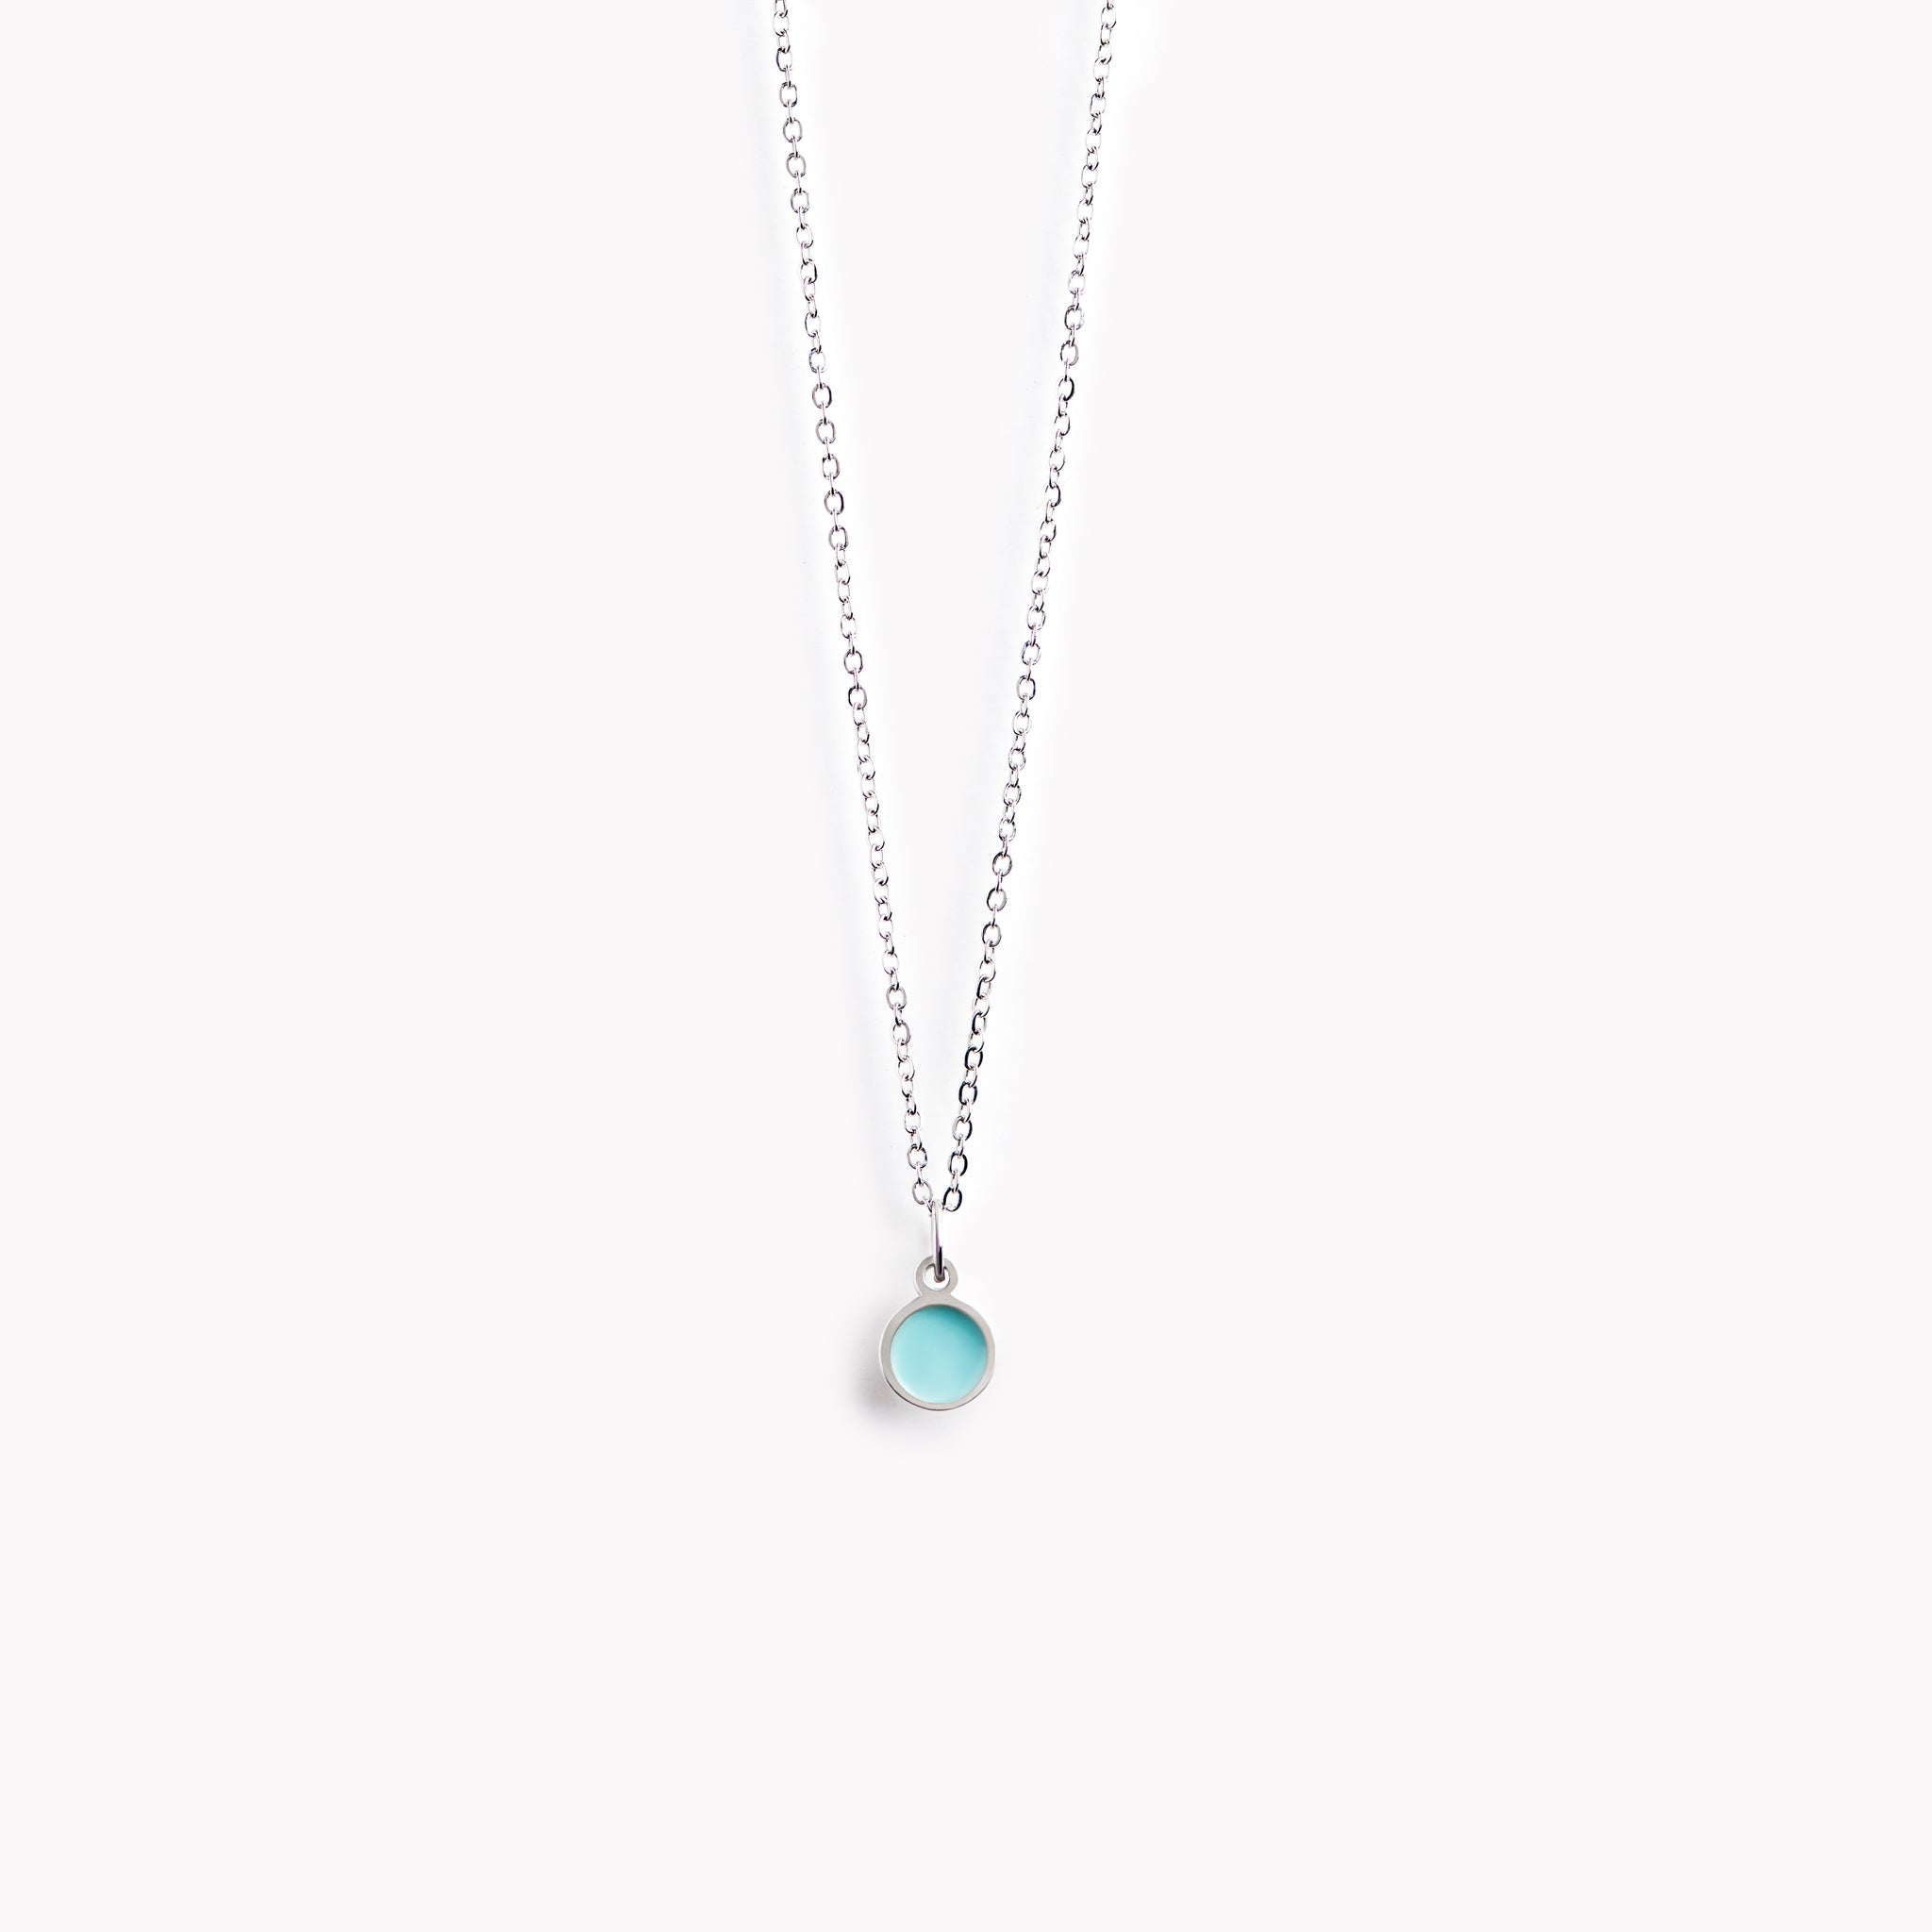 A simple, delicate, circular necklace with a light turquoise centre and a polished pewter surround.